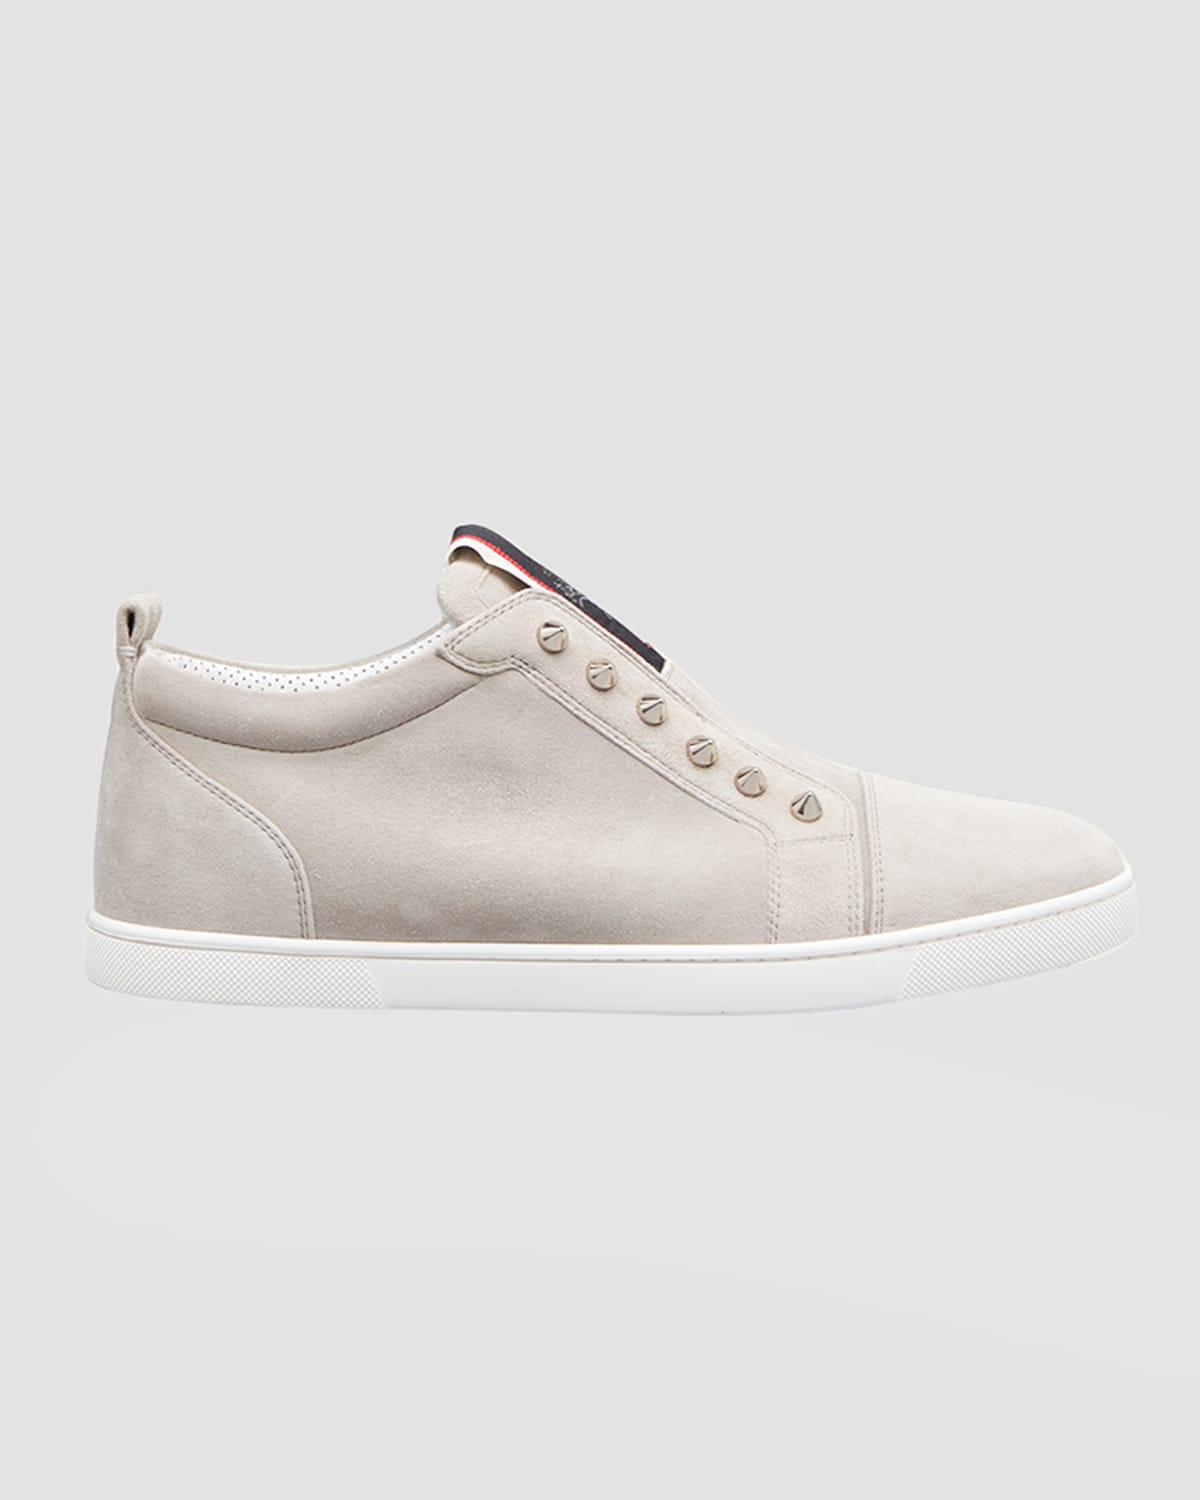 Christian Louboutin Men's F. A.v. Fique A Vontarde Low Top Slip-on Sneakers In Gold